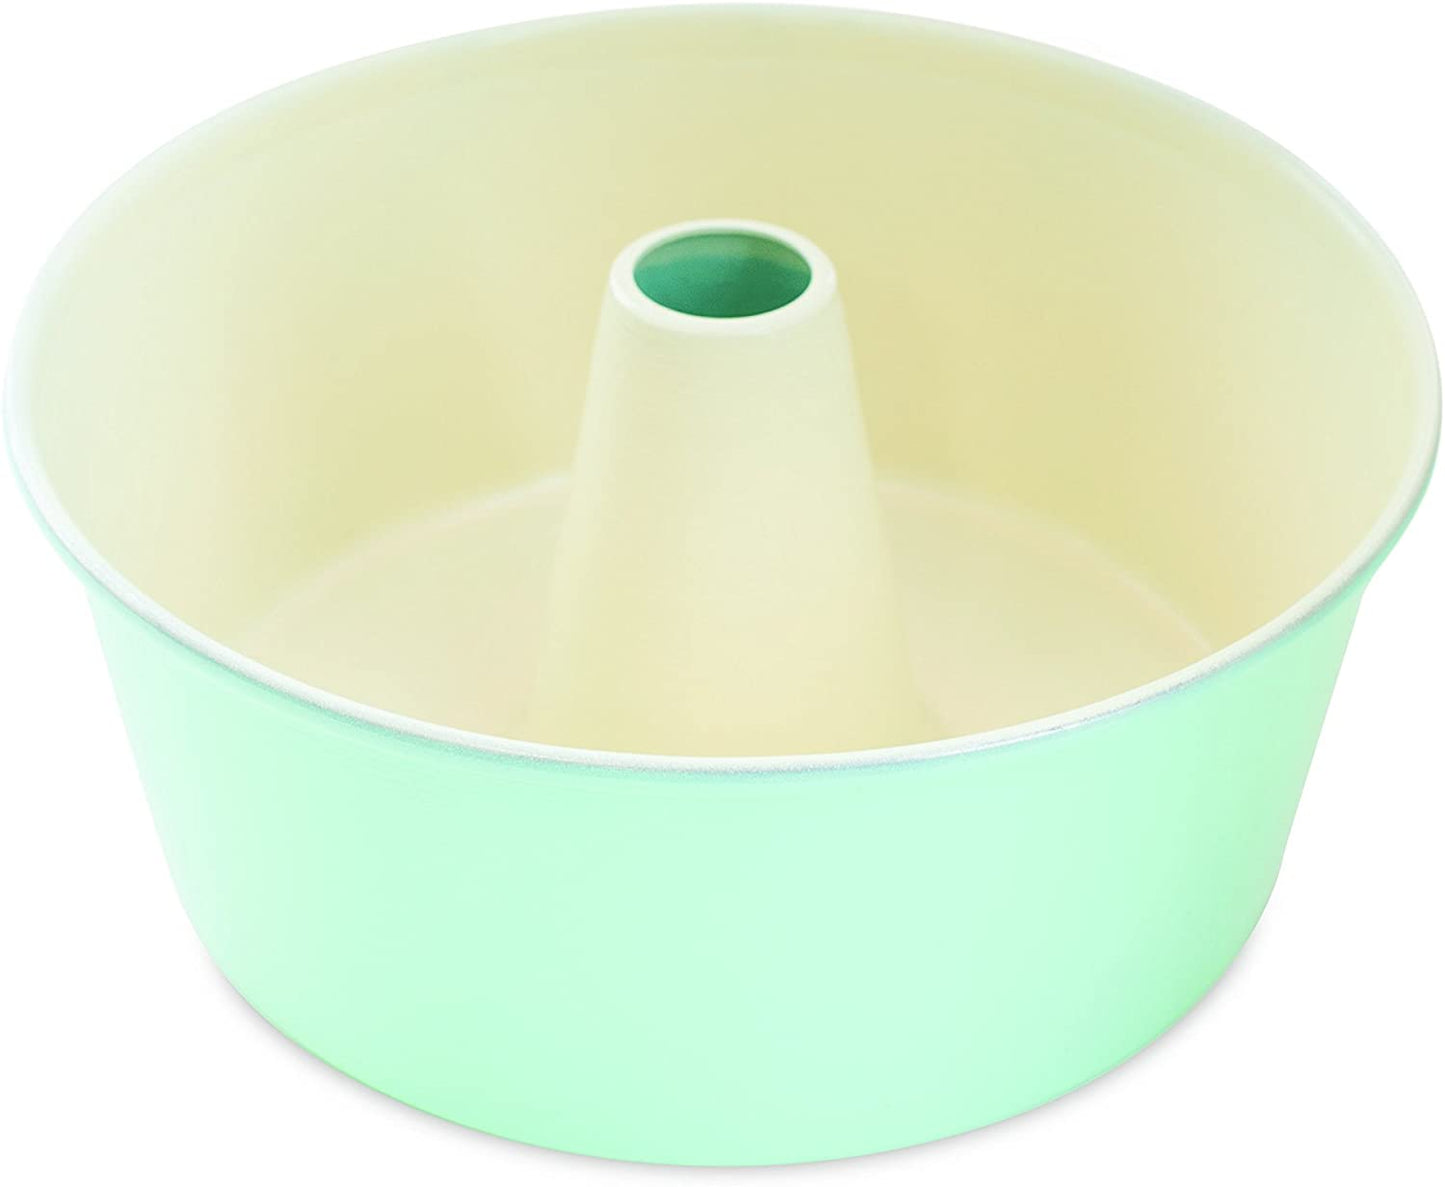 angel food pan with cream interior and mint green exterior.